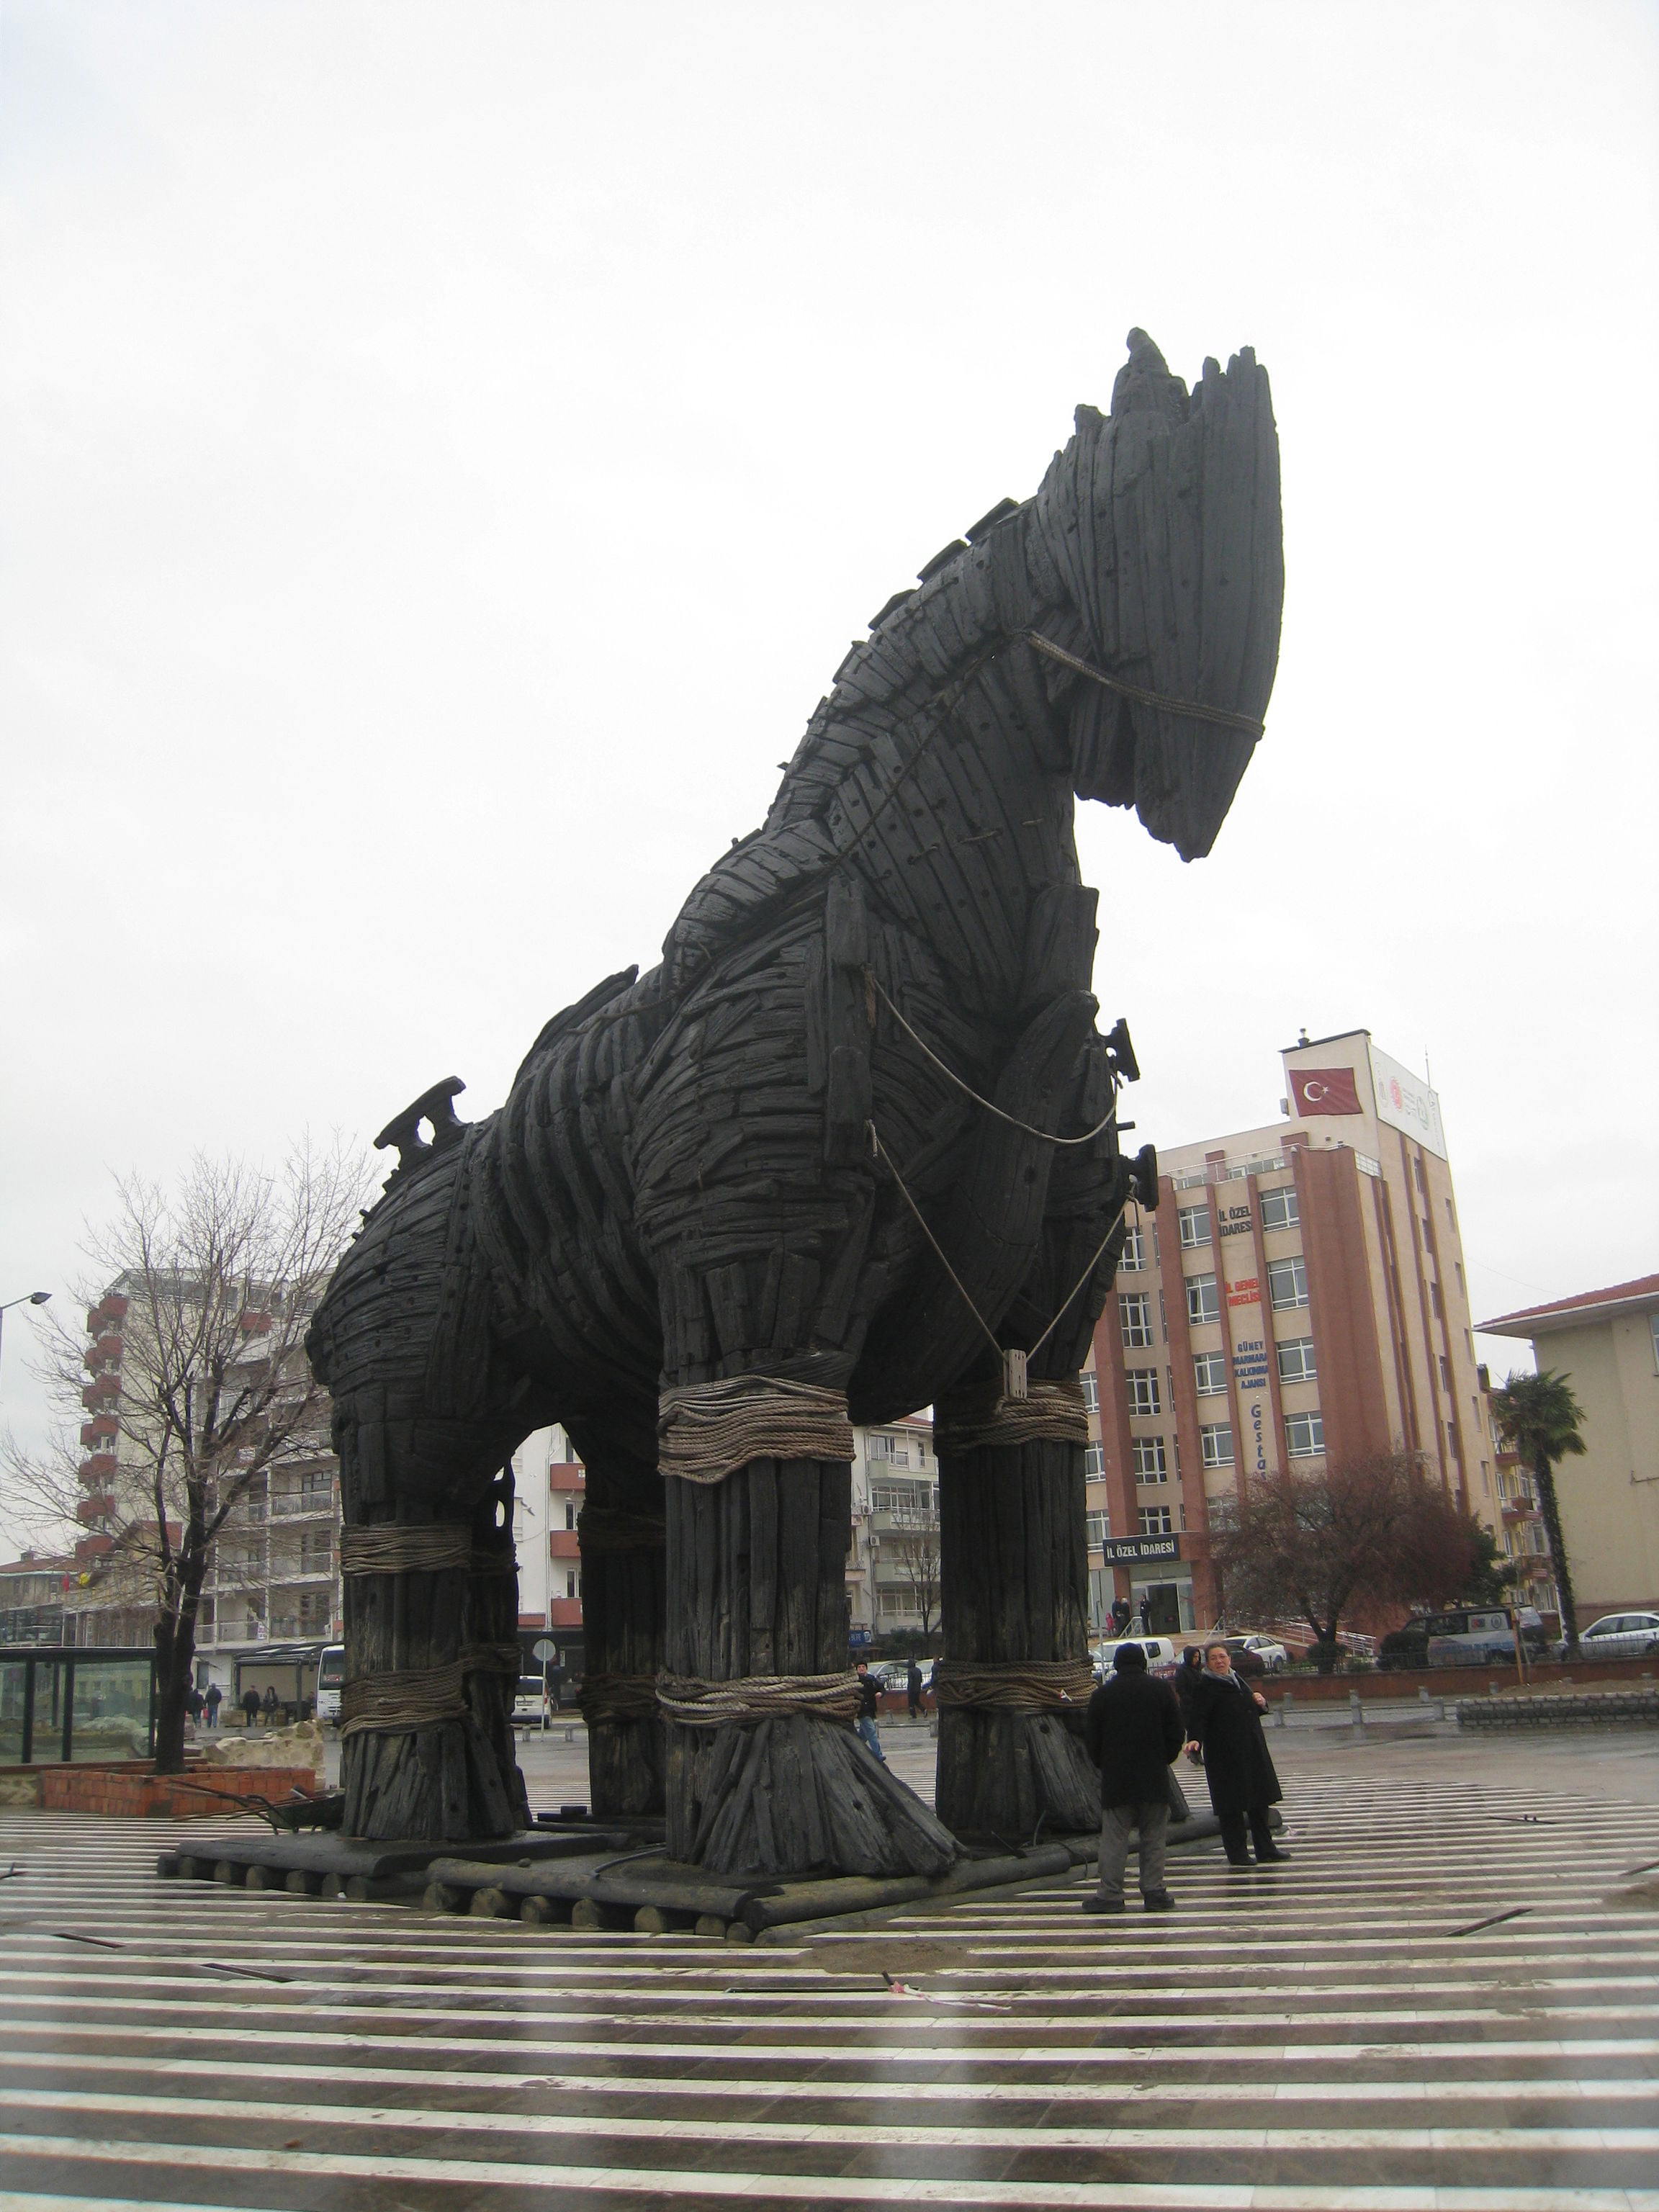 Horse of Troy